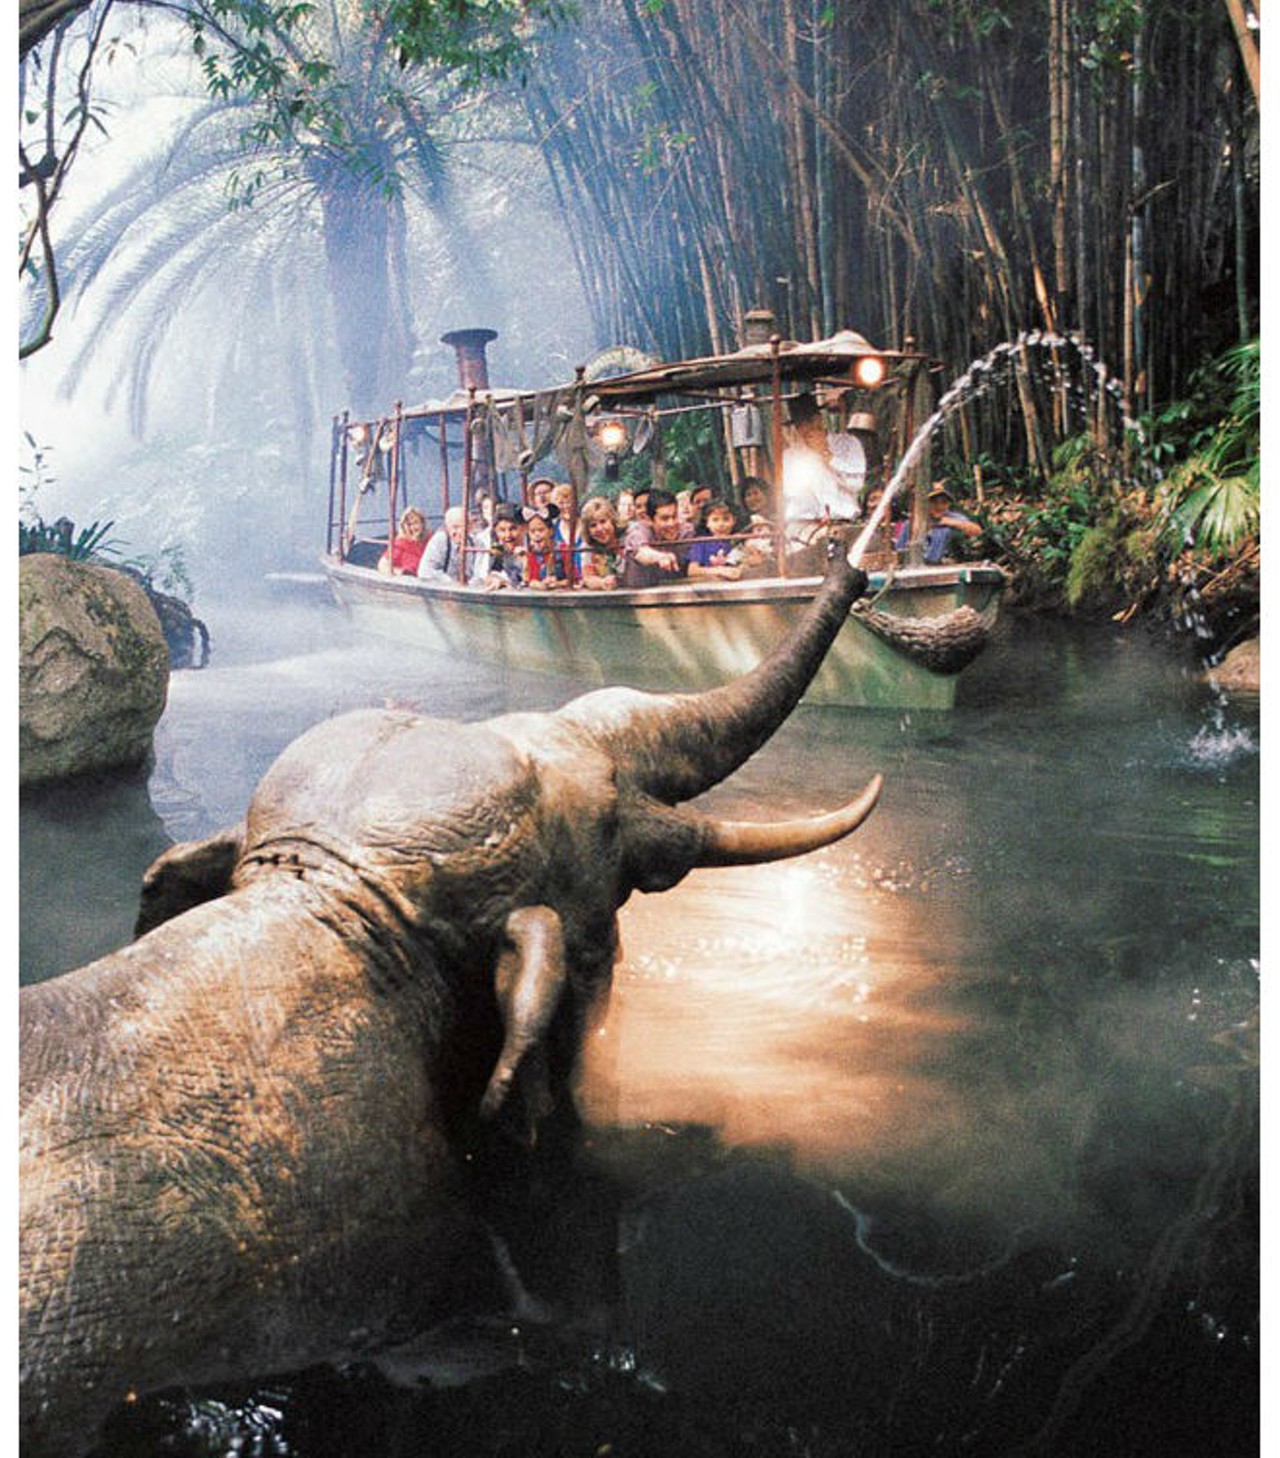 If you've ever been on Disney's Jungle Cruise, you know it's a tropical adventure.